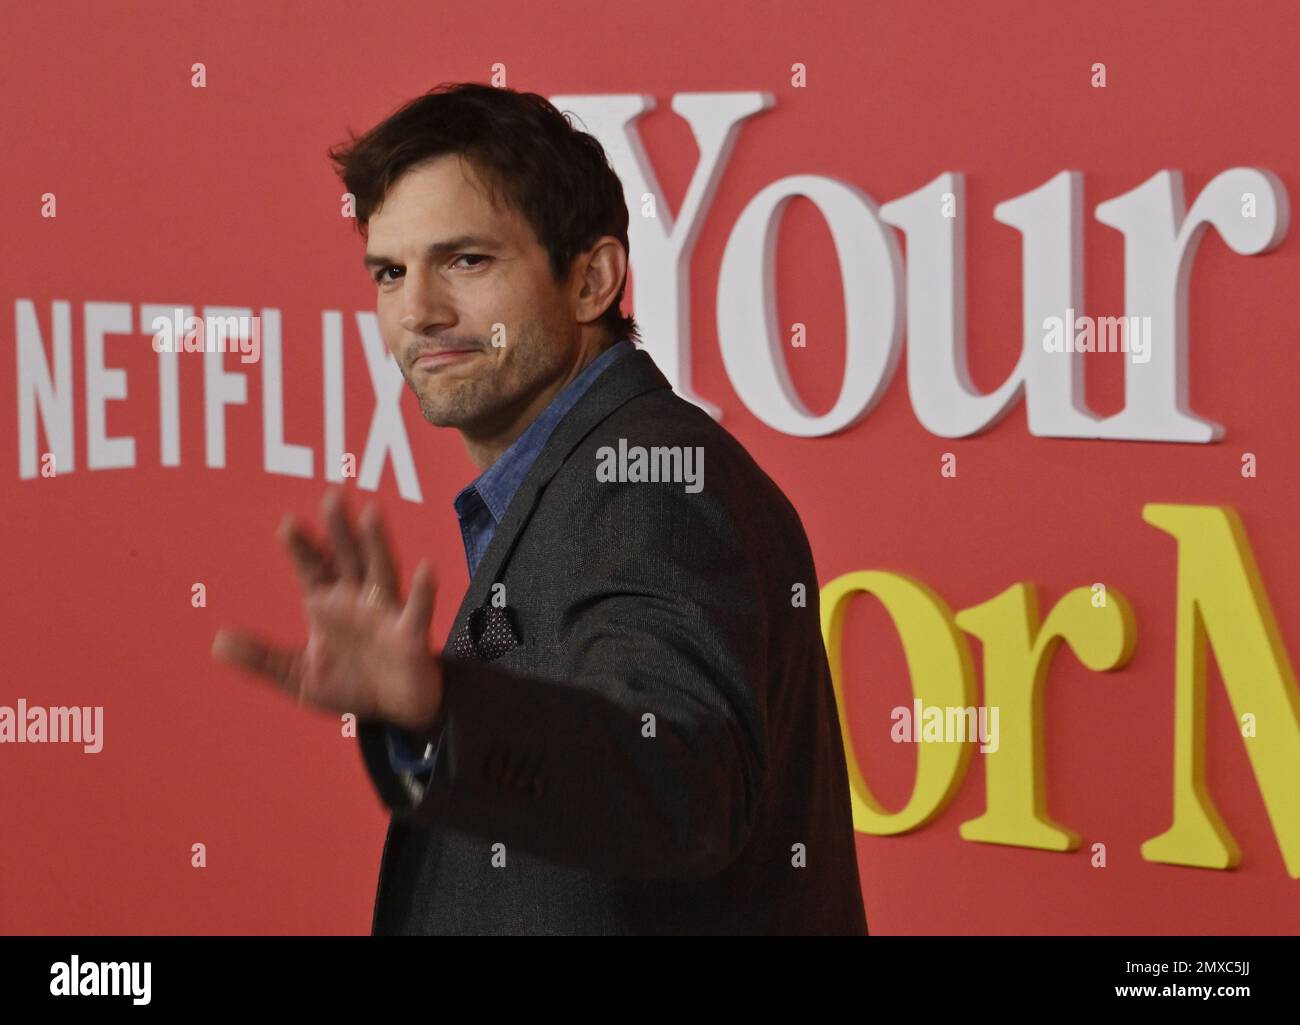 Los Angeles, United States. 02nd Feb, 2023. Cast member Ashton Kutcher attends the premiere of the motion picture romantic comedy 'Your Place or Mine' at the Regency Village Theatre in the Westwood section of Los Angeles on Thursday, February 2, 2023. Storyline: Two long-distance best friends change each other's lives when she decides to pursue a lifelong dream and he volunteers to keep an eye on her teenage son. Photo by Jim Ruymen/UPI Credit: UPI/Alamy Live News Stock Photo